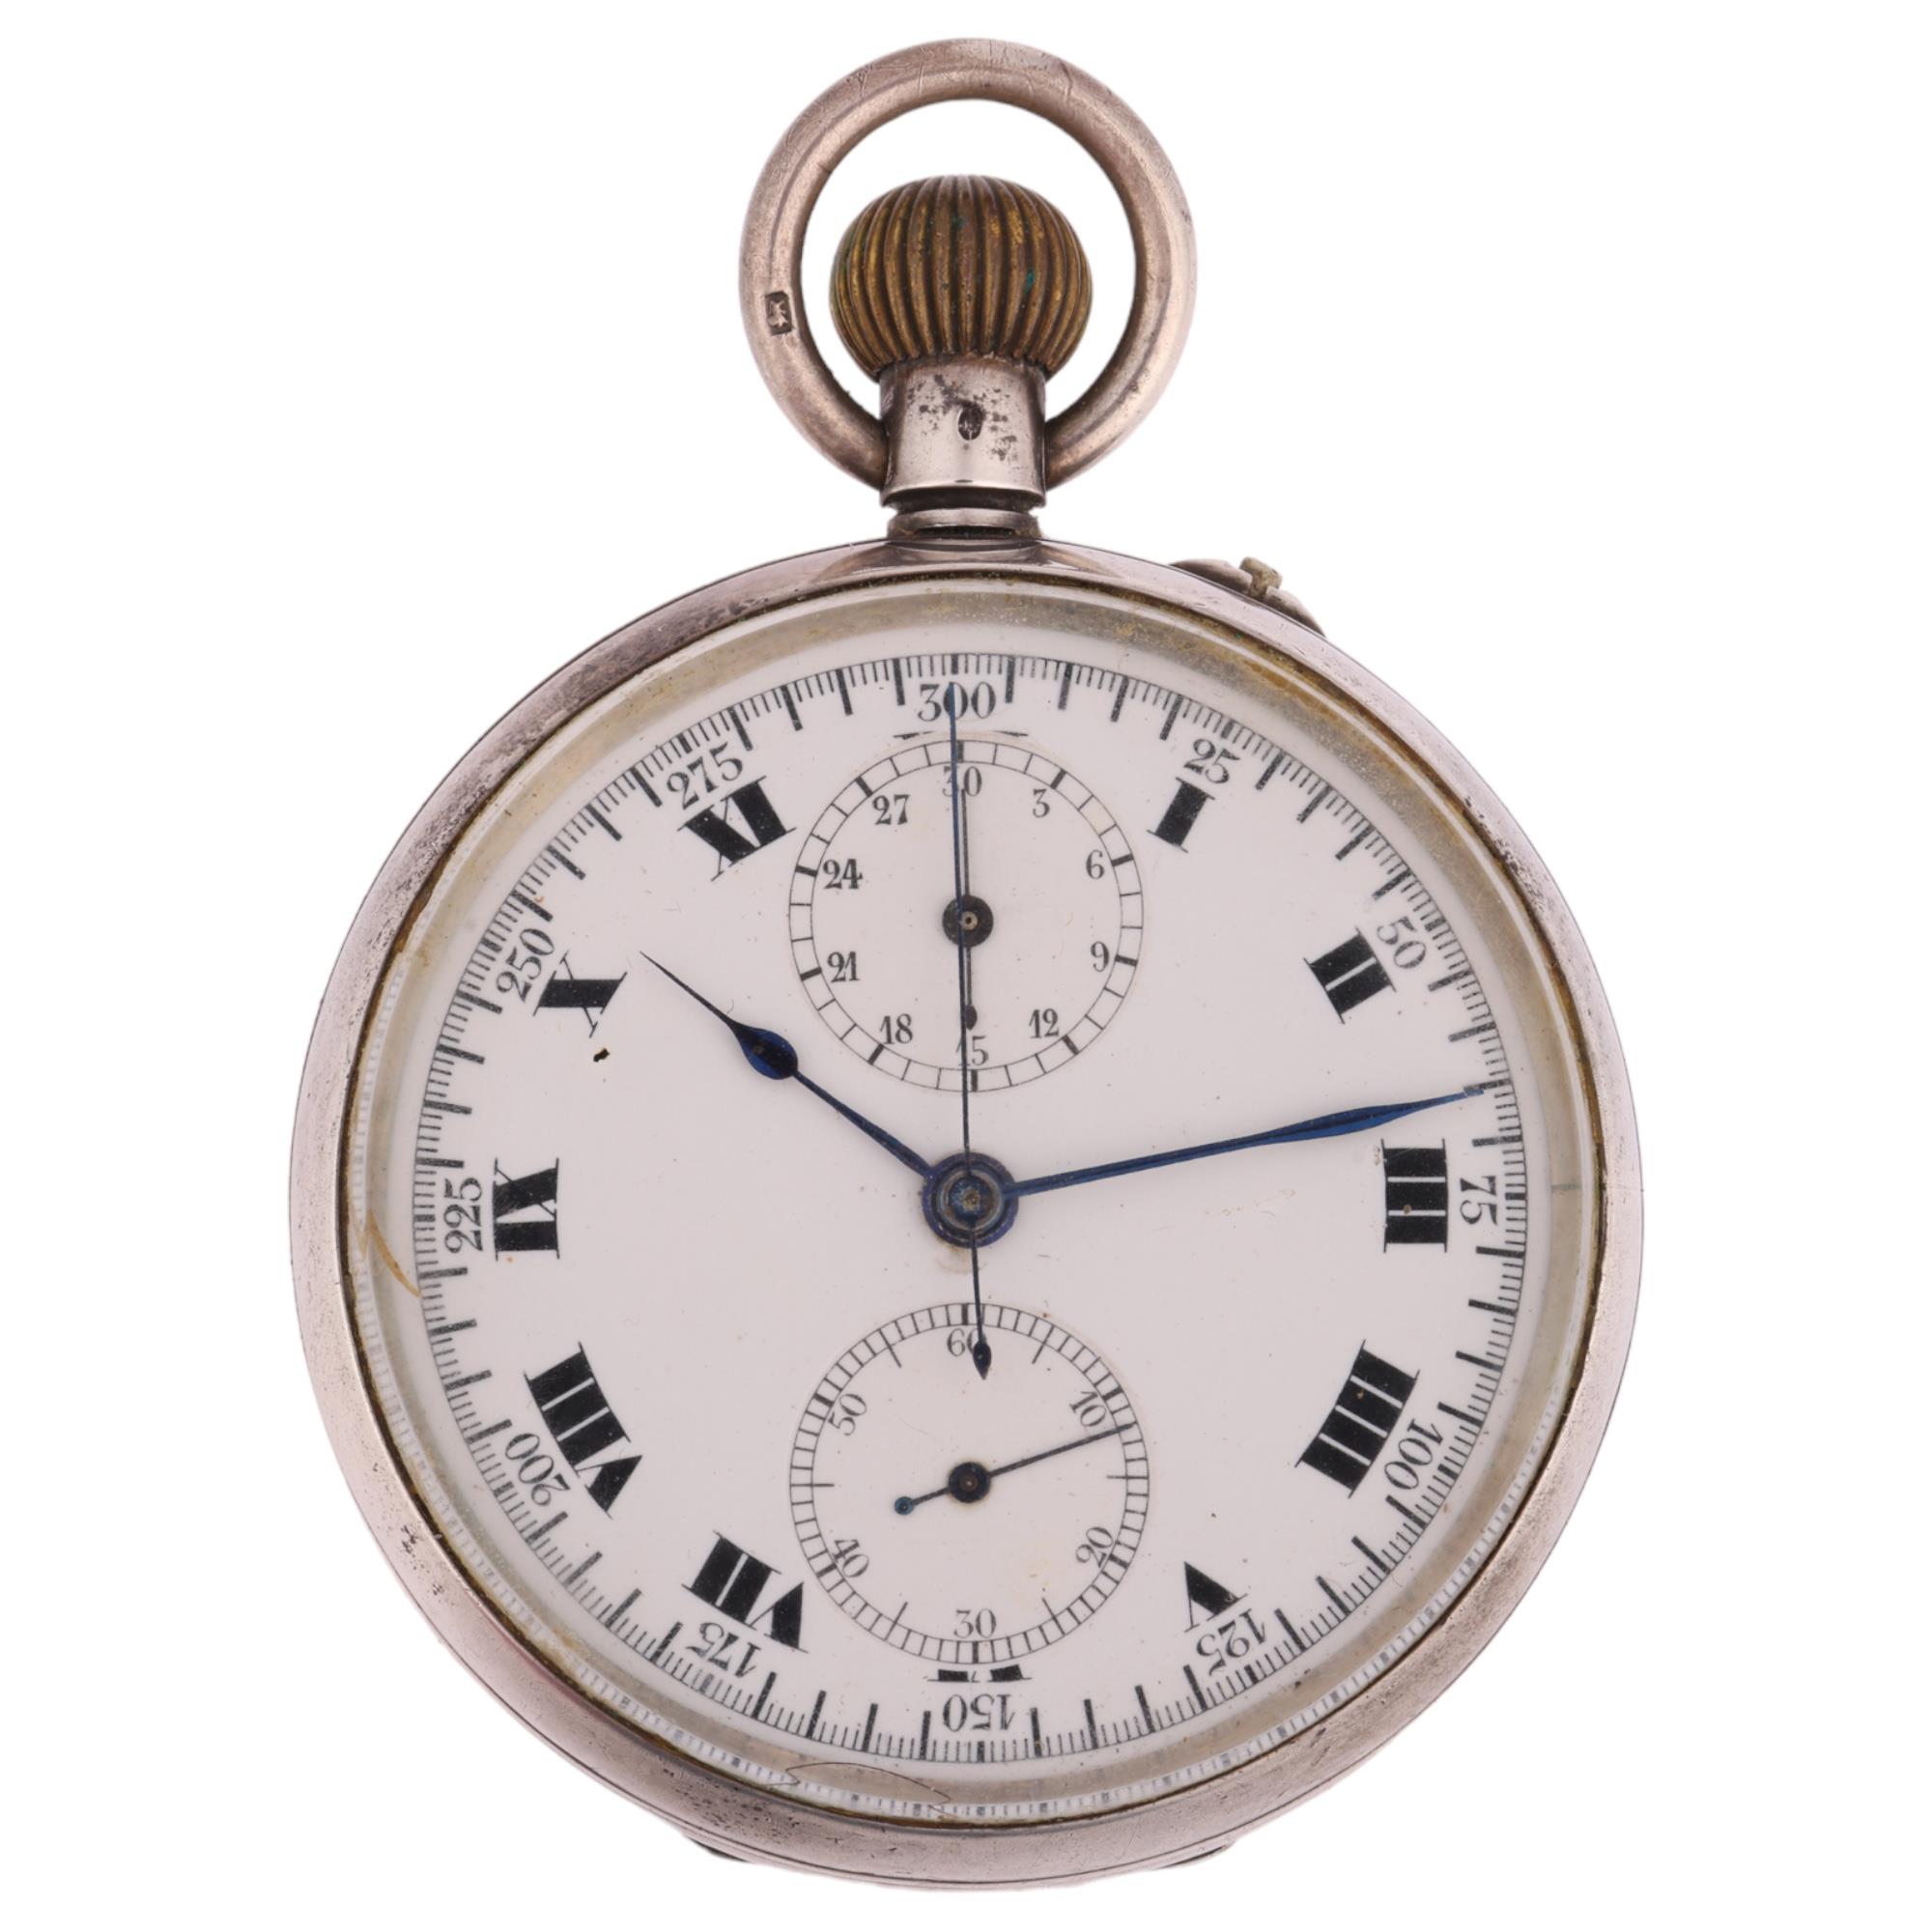 An early 20th century silver-cased open-face keyless chronograph pocket watch, white enamel dial